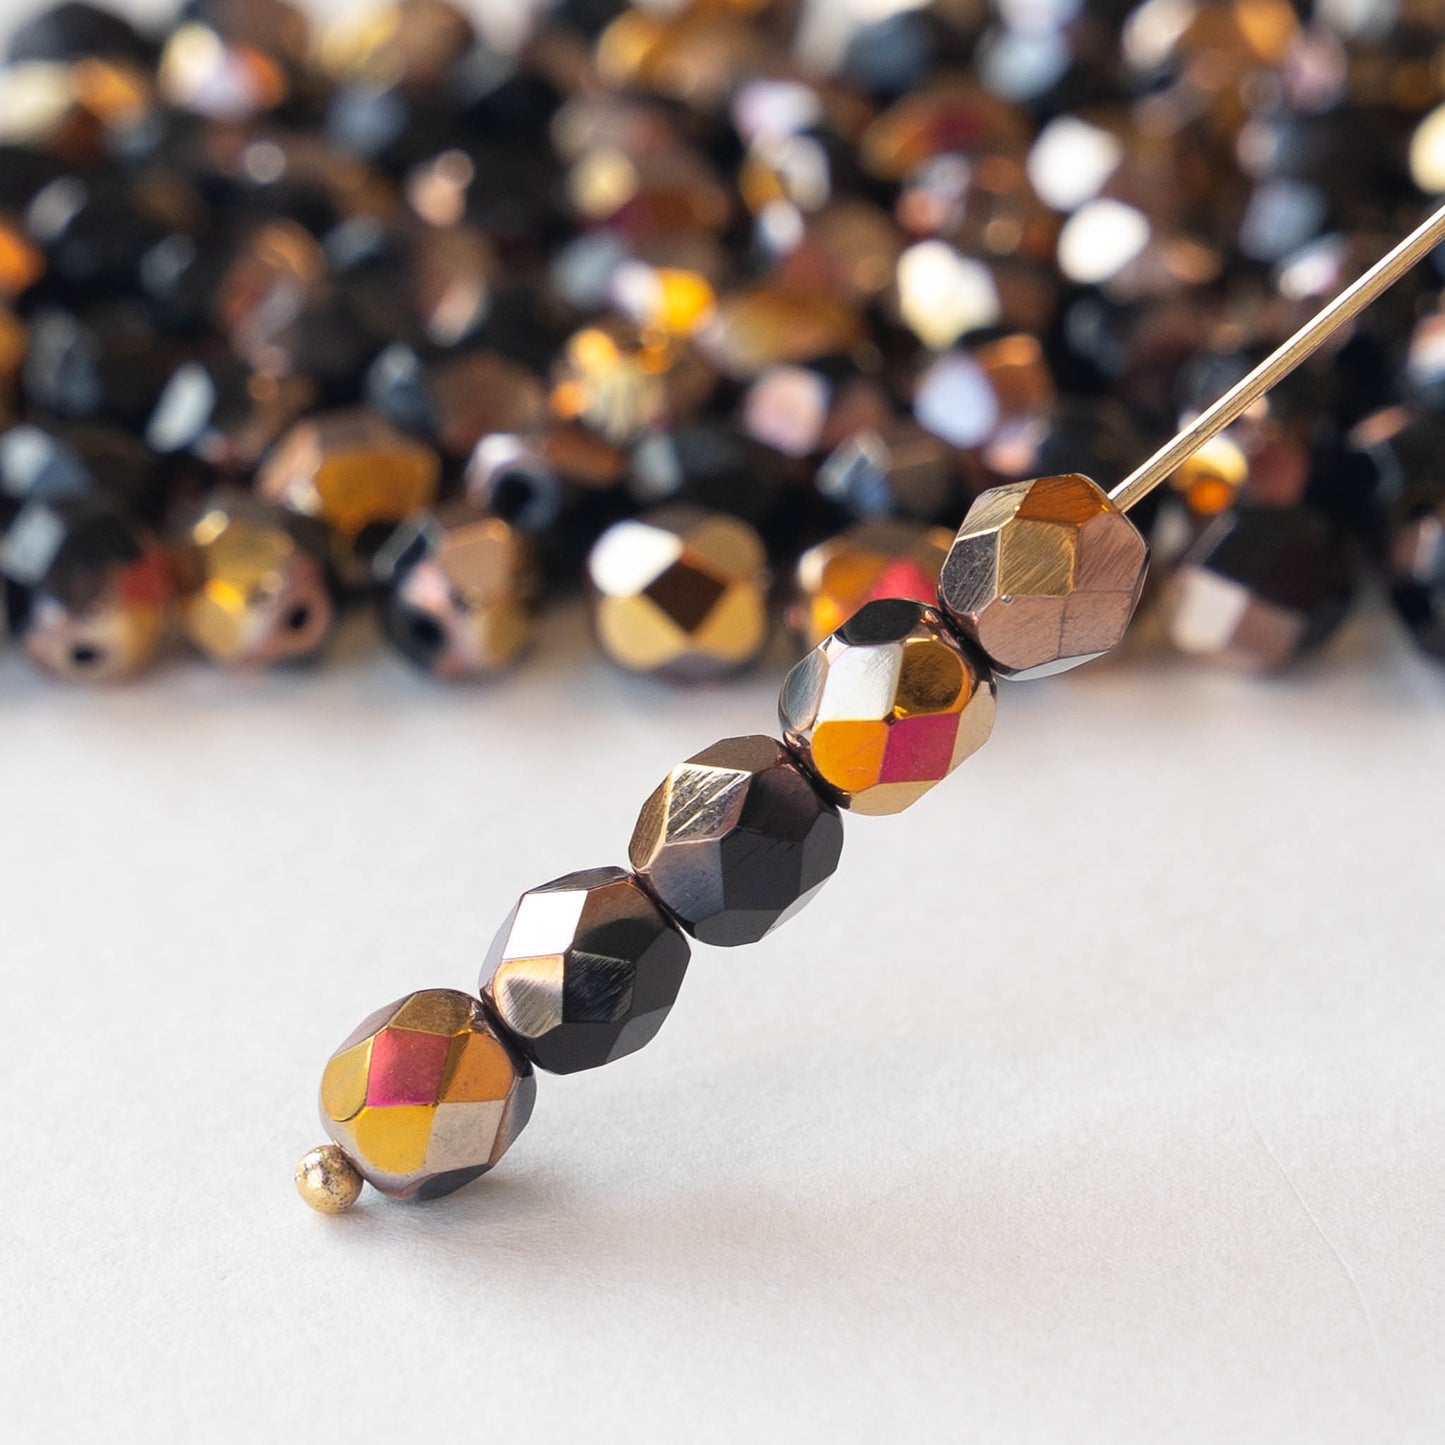 Load image into Gallery viewer, 6mm Faceted Round Beads - Opaque Black with Metallic Tones - 50 beads
